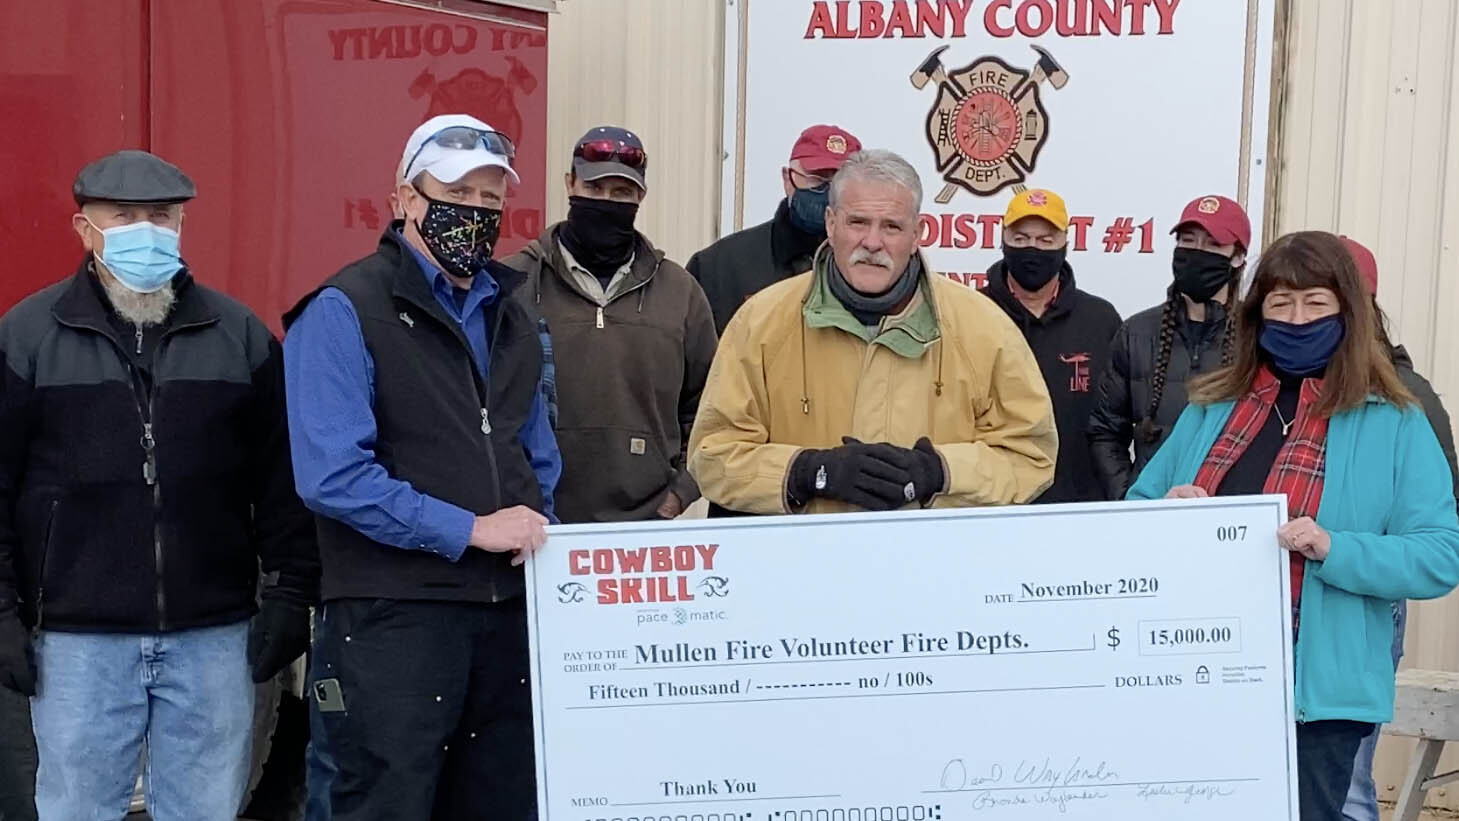 Amidst a Wildfire Crisis, Cowboy Skill Supports Mullen Fire Department with $15,000